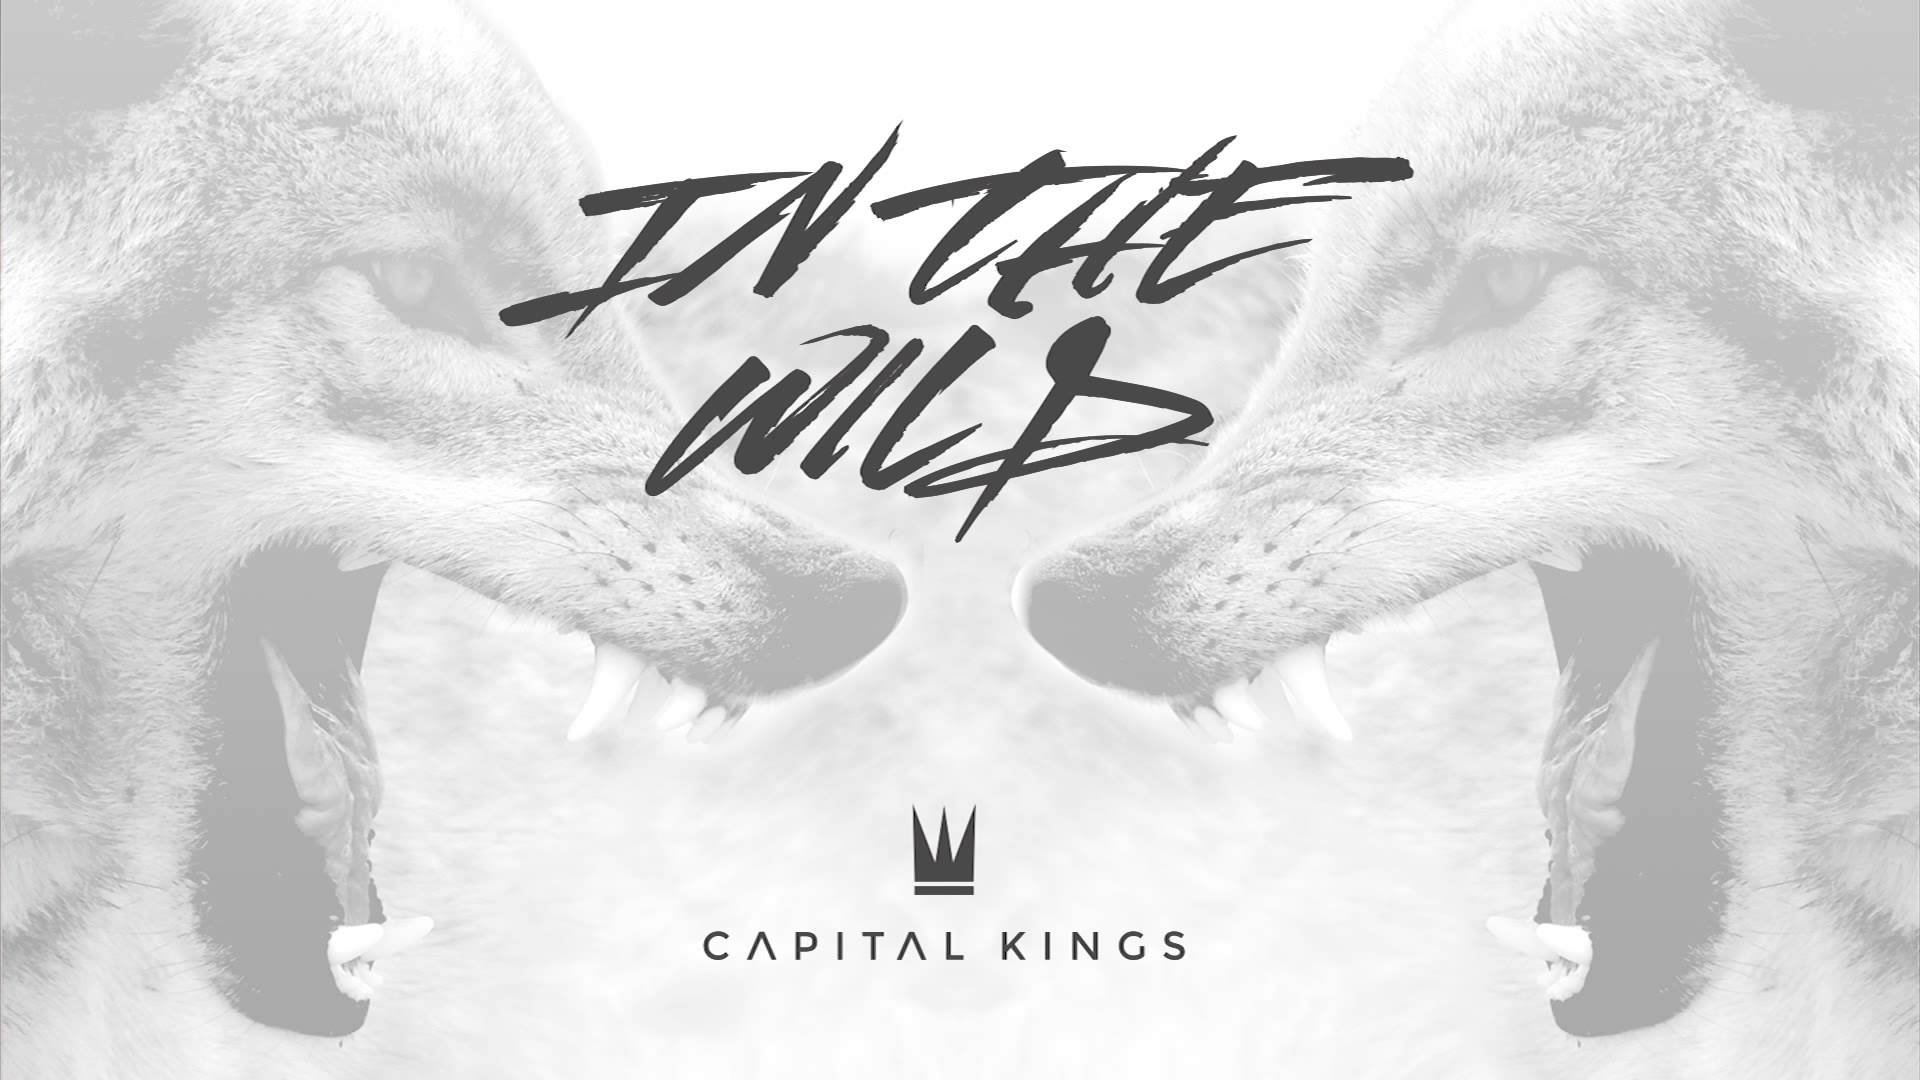 Capital Kings - In The Wild (Official Audio) - YouTube